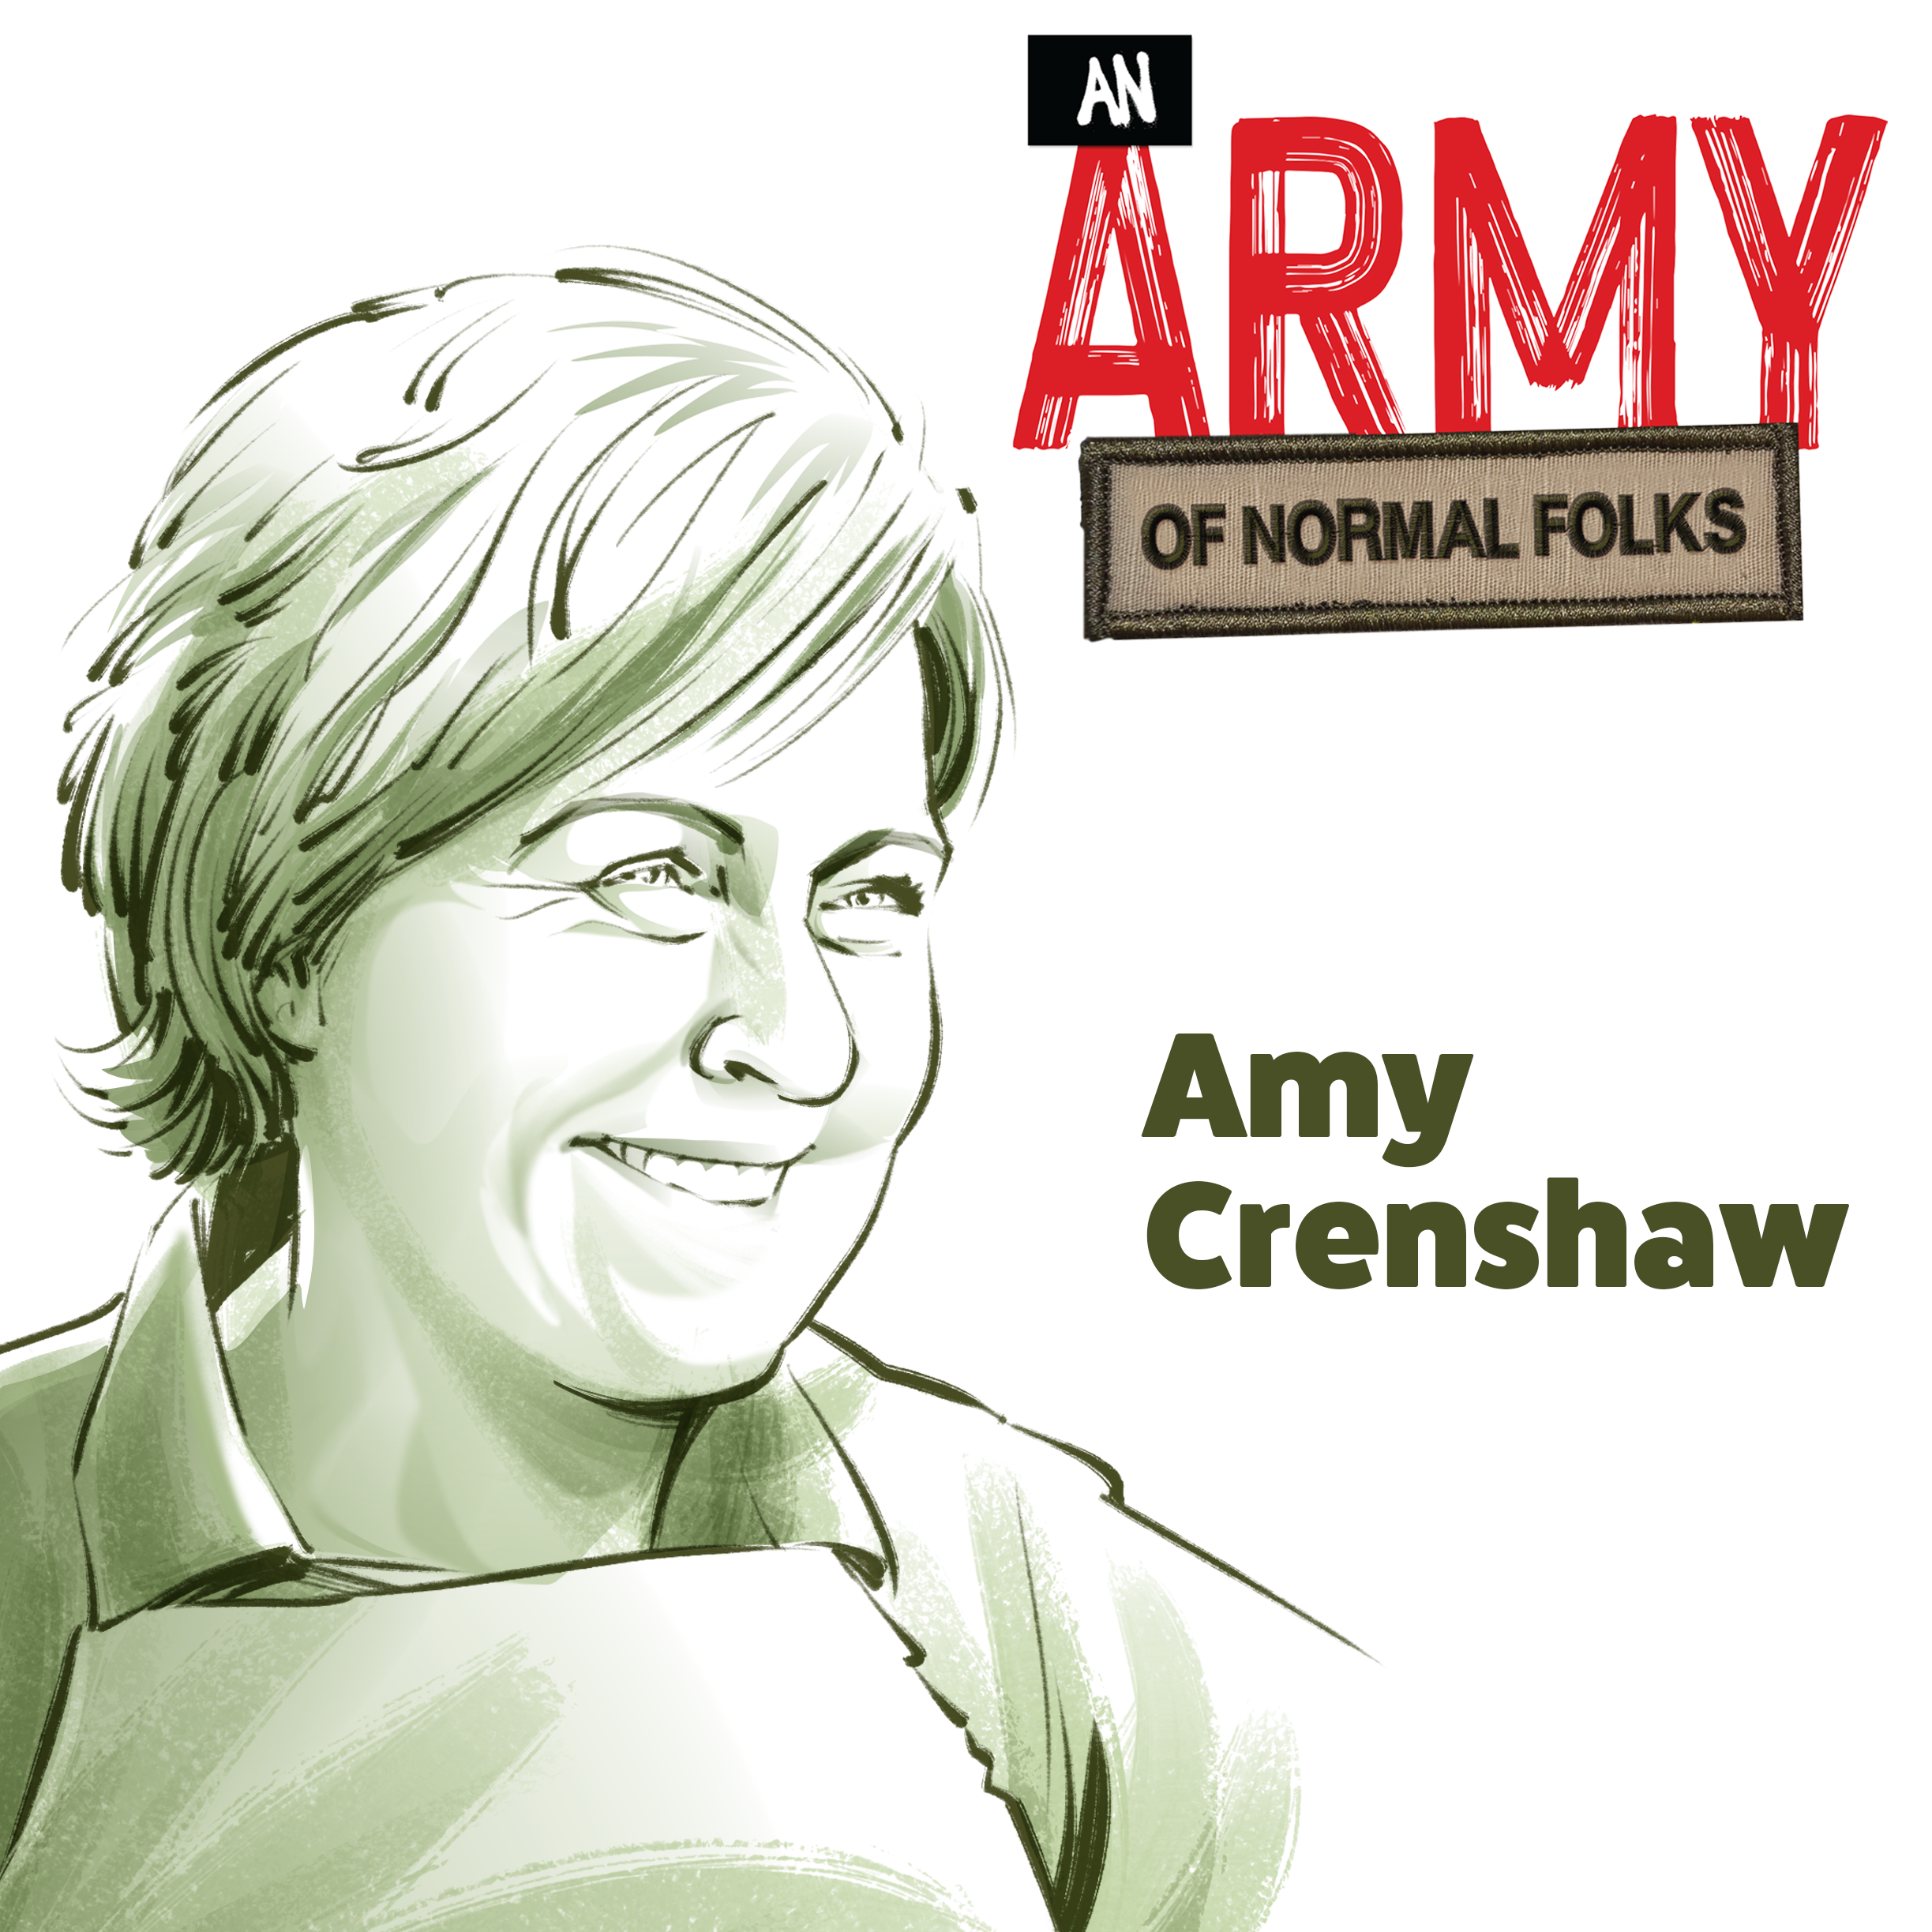 Amy Crenshaw’s Cafe: Where The Homeless and Bankers Eat Together (Pt 2)